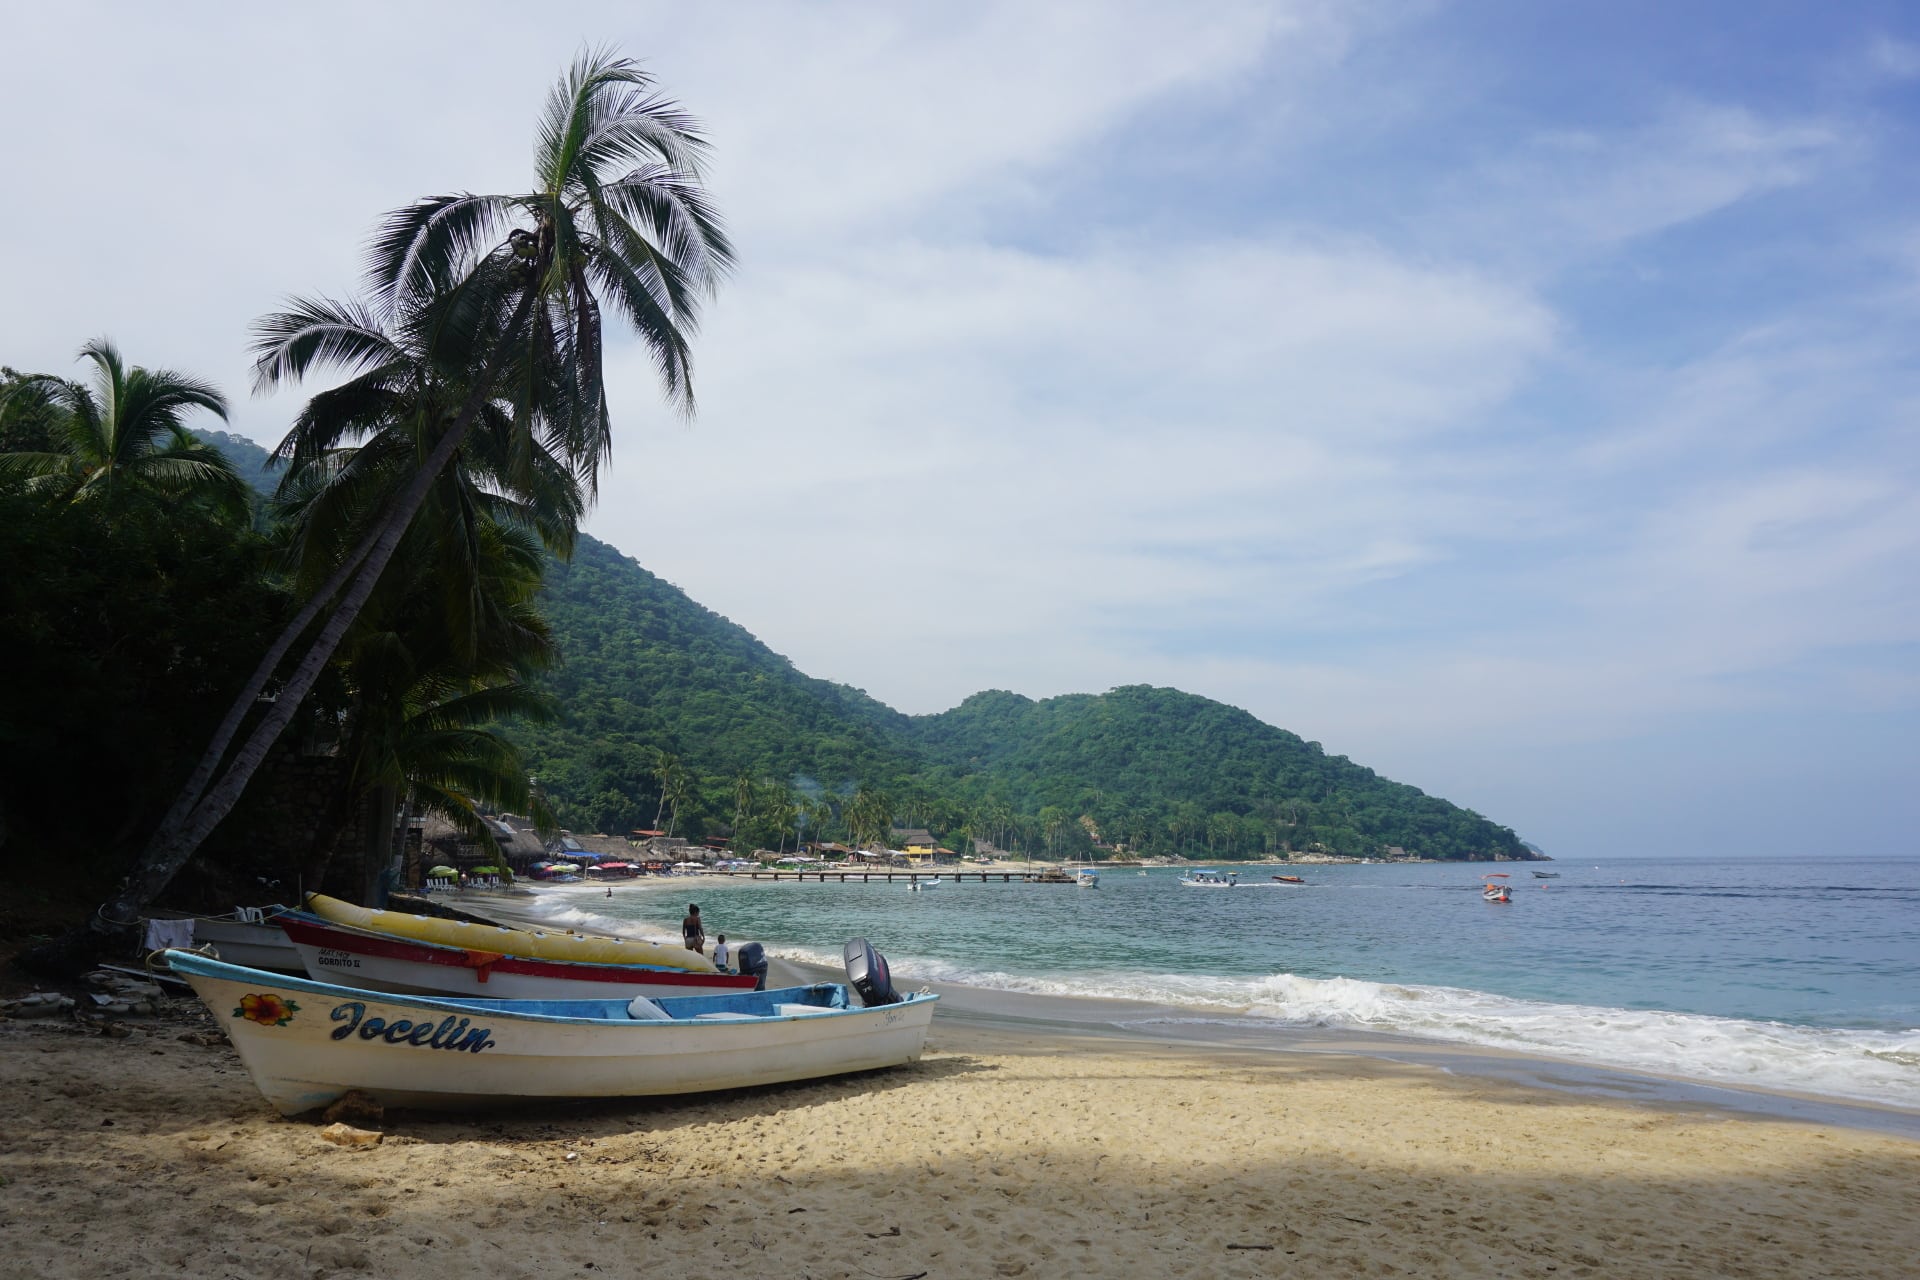 Two small fishing boats on a tropical beach